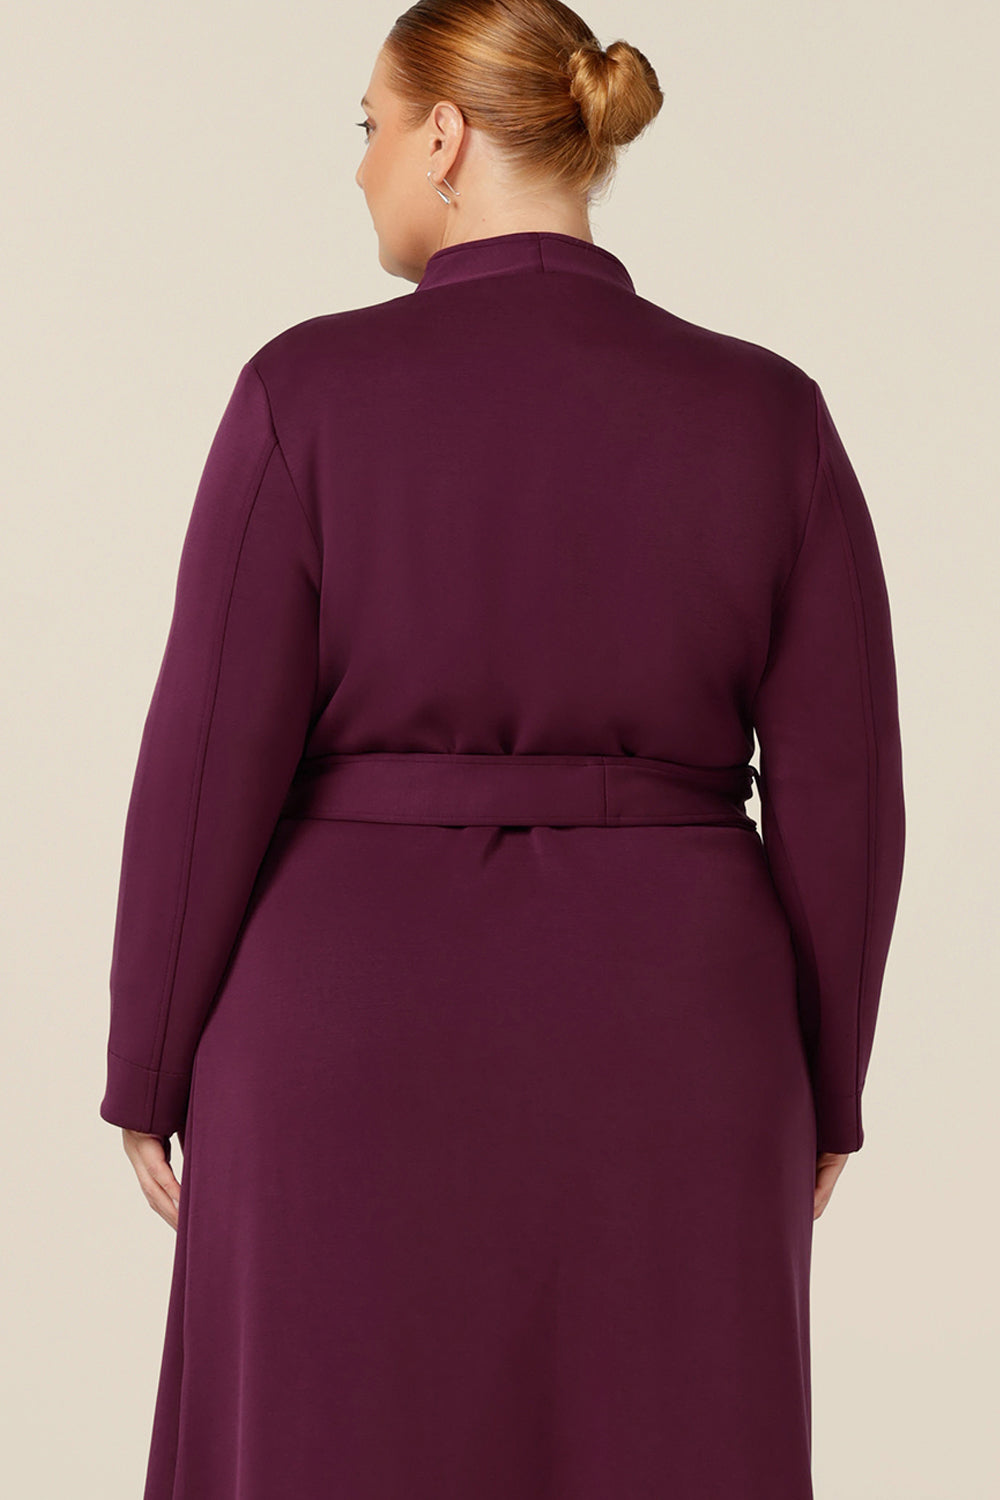 Back view of Australia and New Zealand women's clothing label, L&F's best lightweight coat for travel. This soft tailoring trenchcoat is made in winter-weight modal to shape a comfortable coat for petite to plus size women.